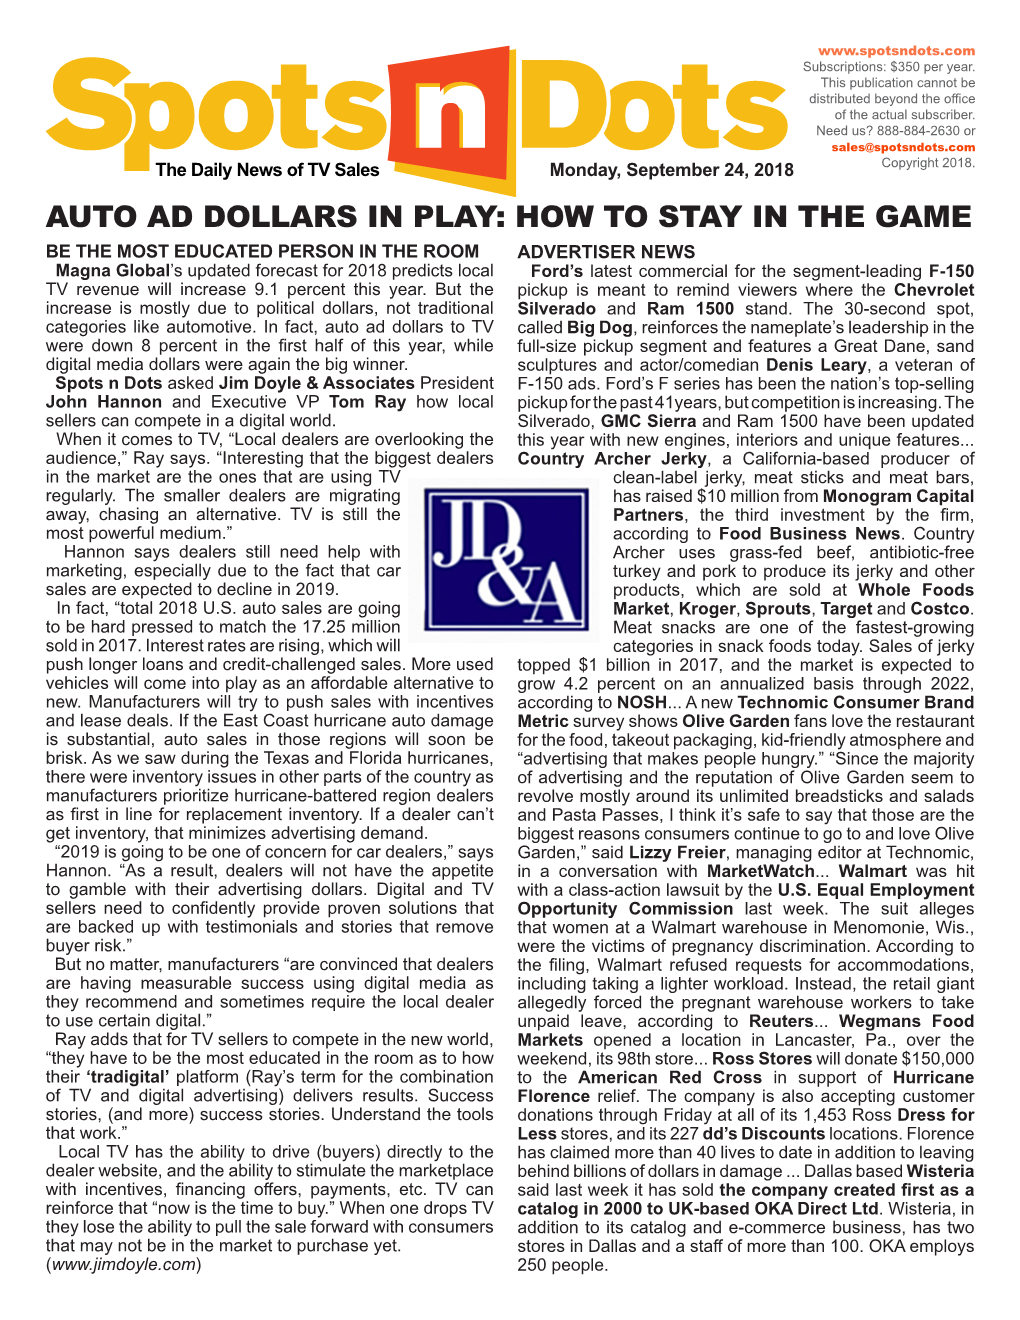 Auto Ad Dollars in Play